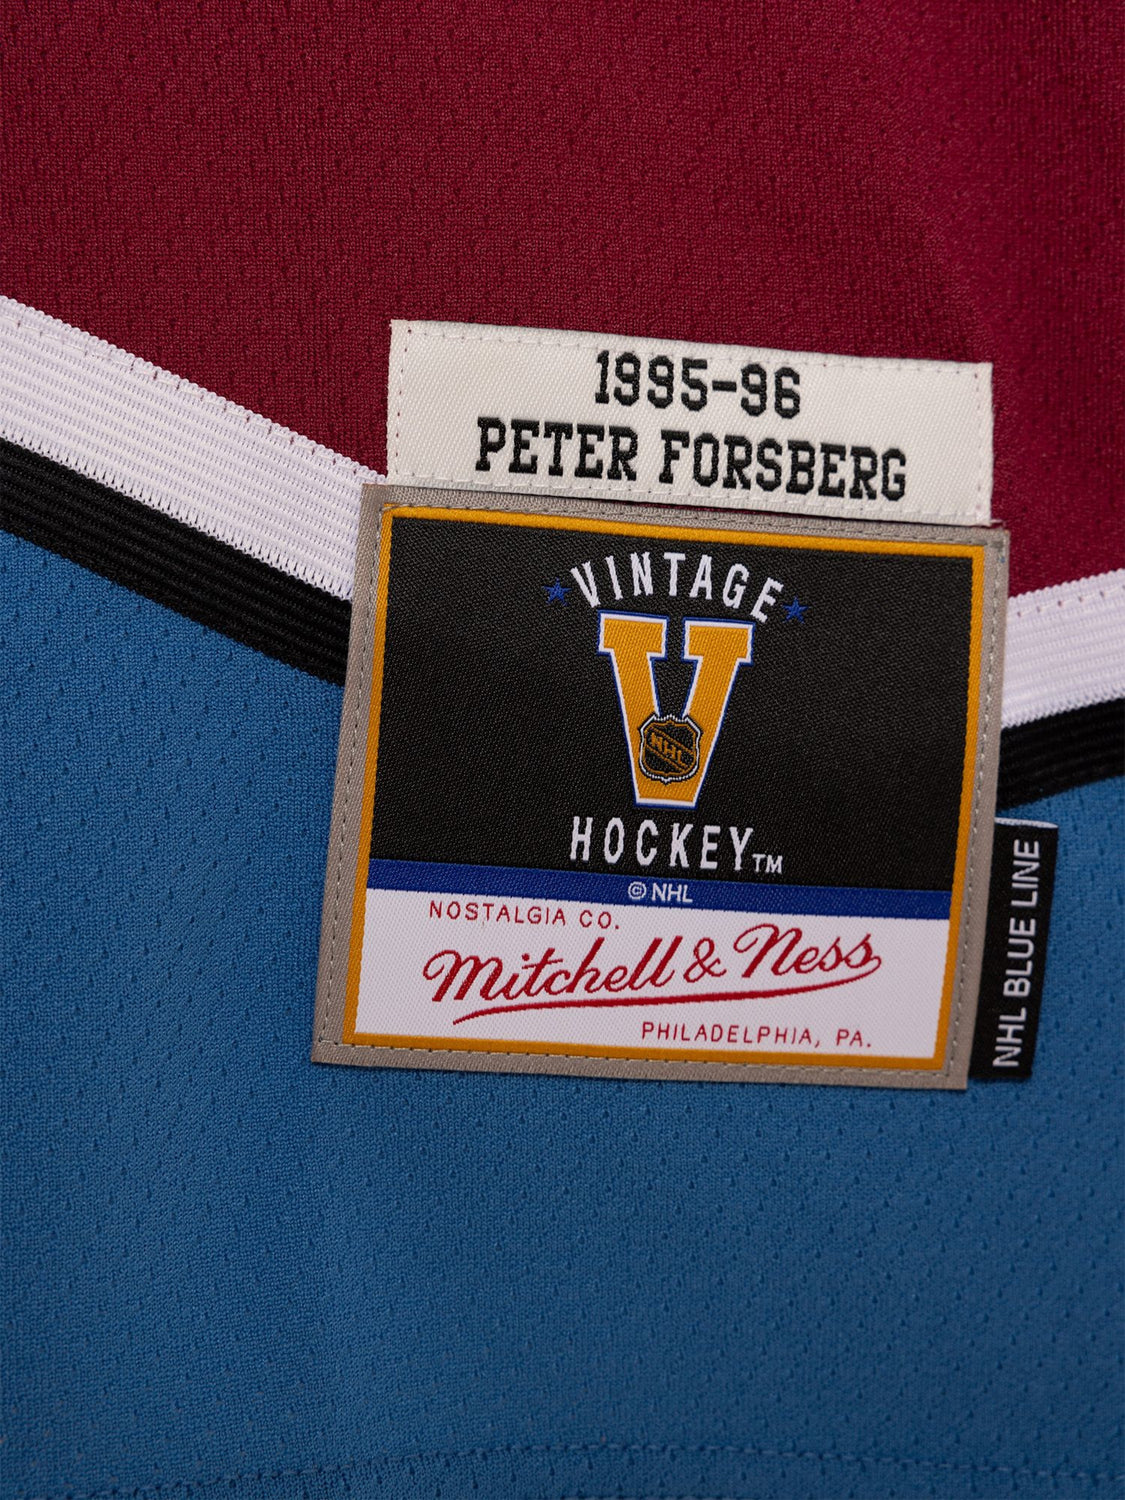 Colorado Avalanche on X: RT @NHL: If Peter Forsberg dressed for a